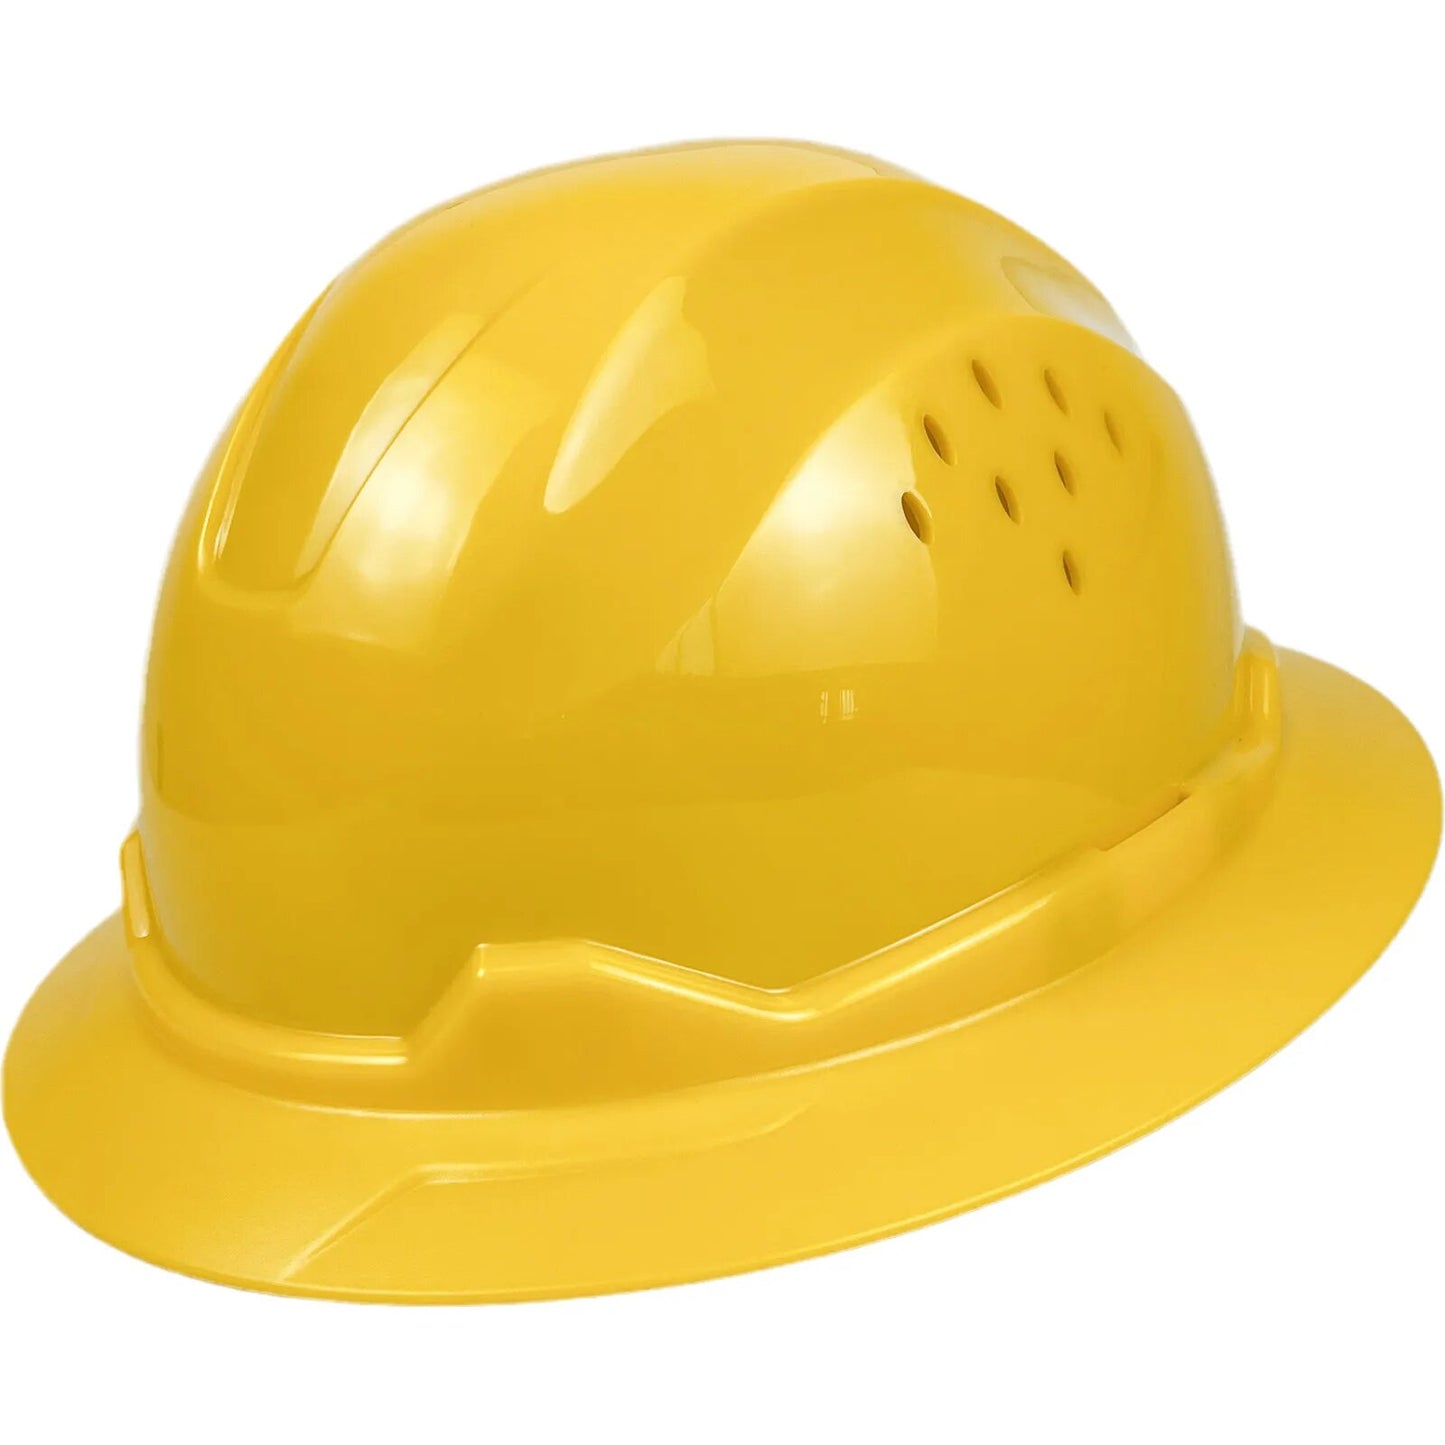 ANSI Approved HDPE Safety Helmet with 6 Point Adjustable